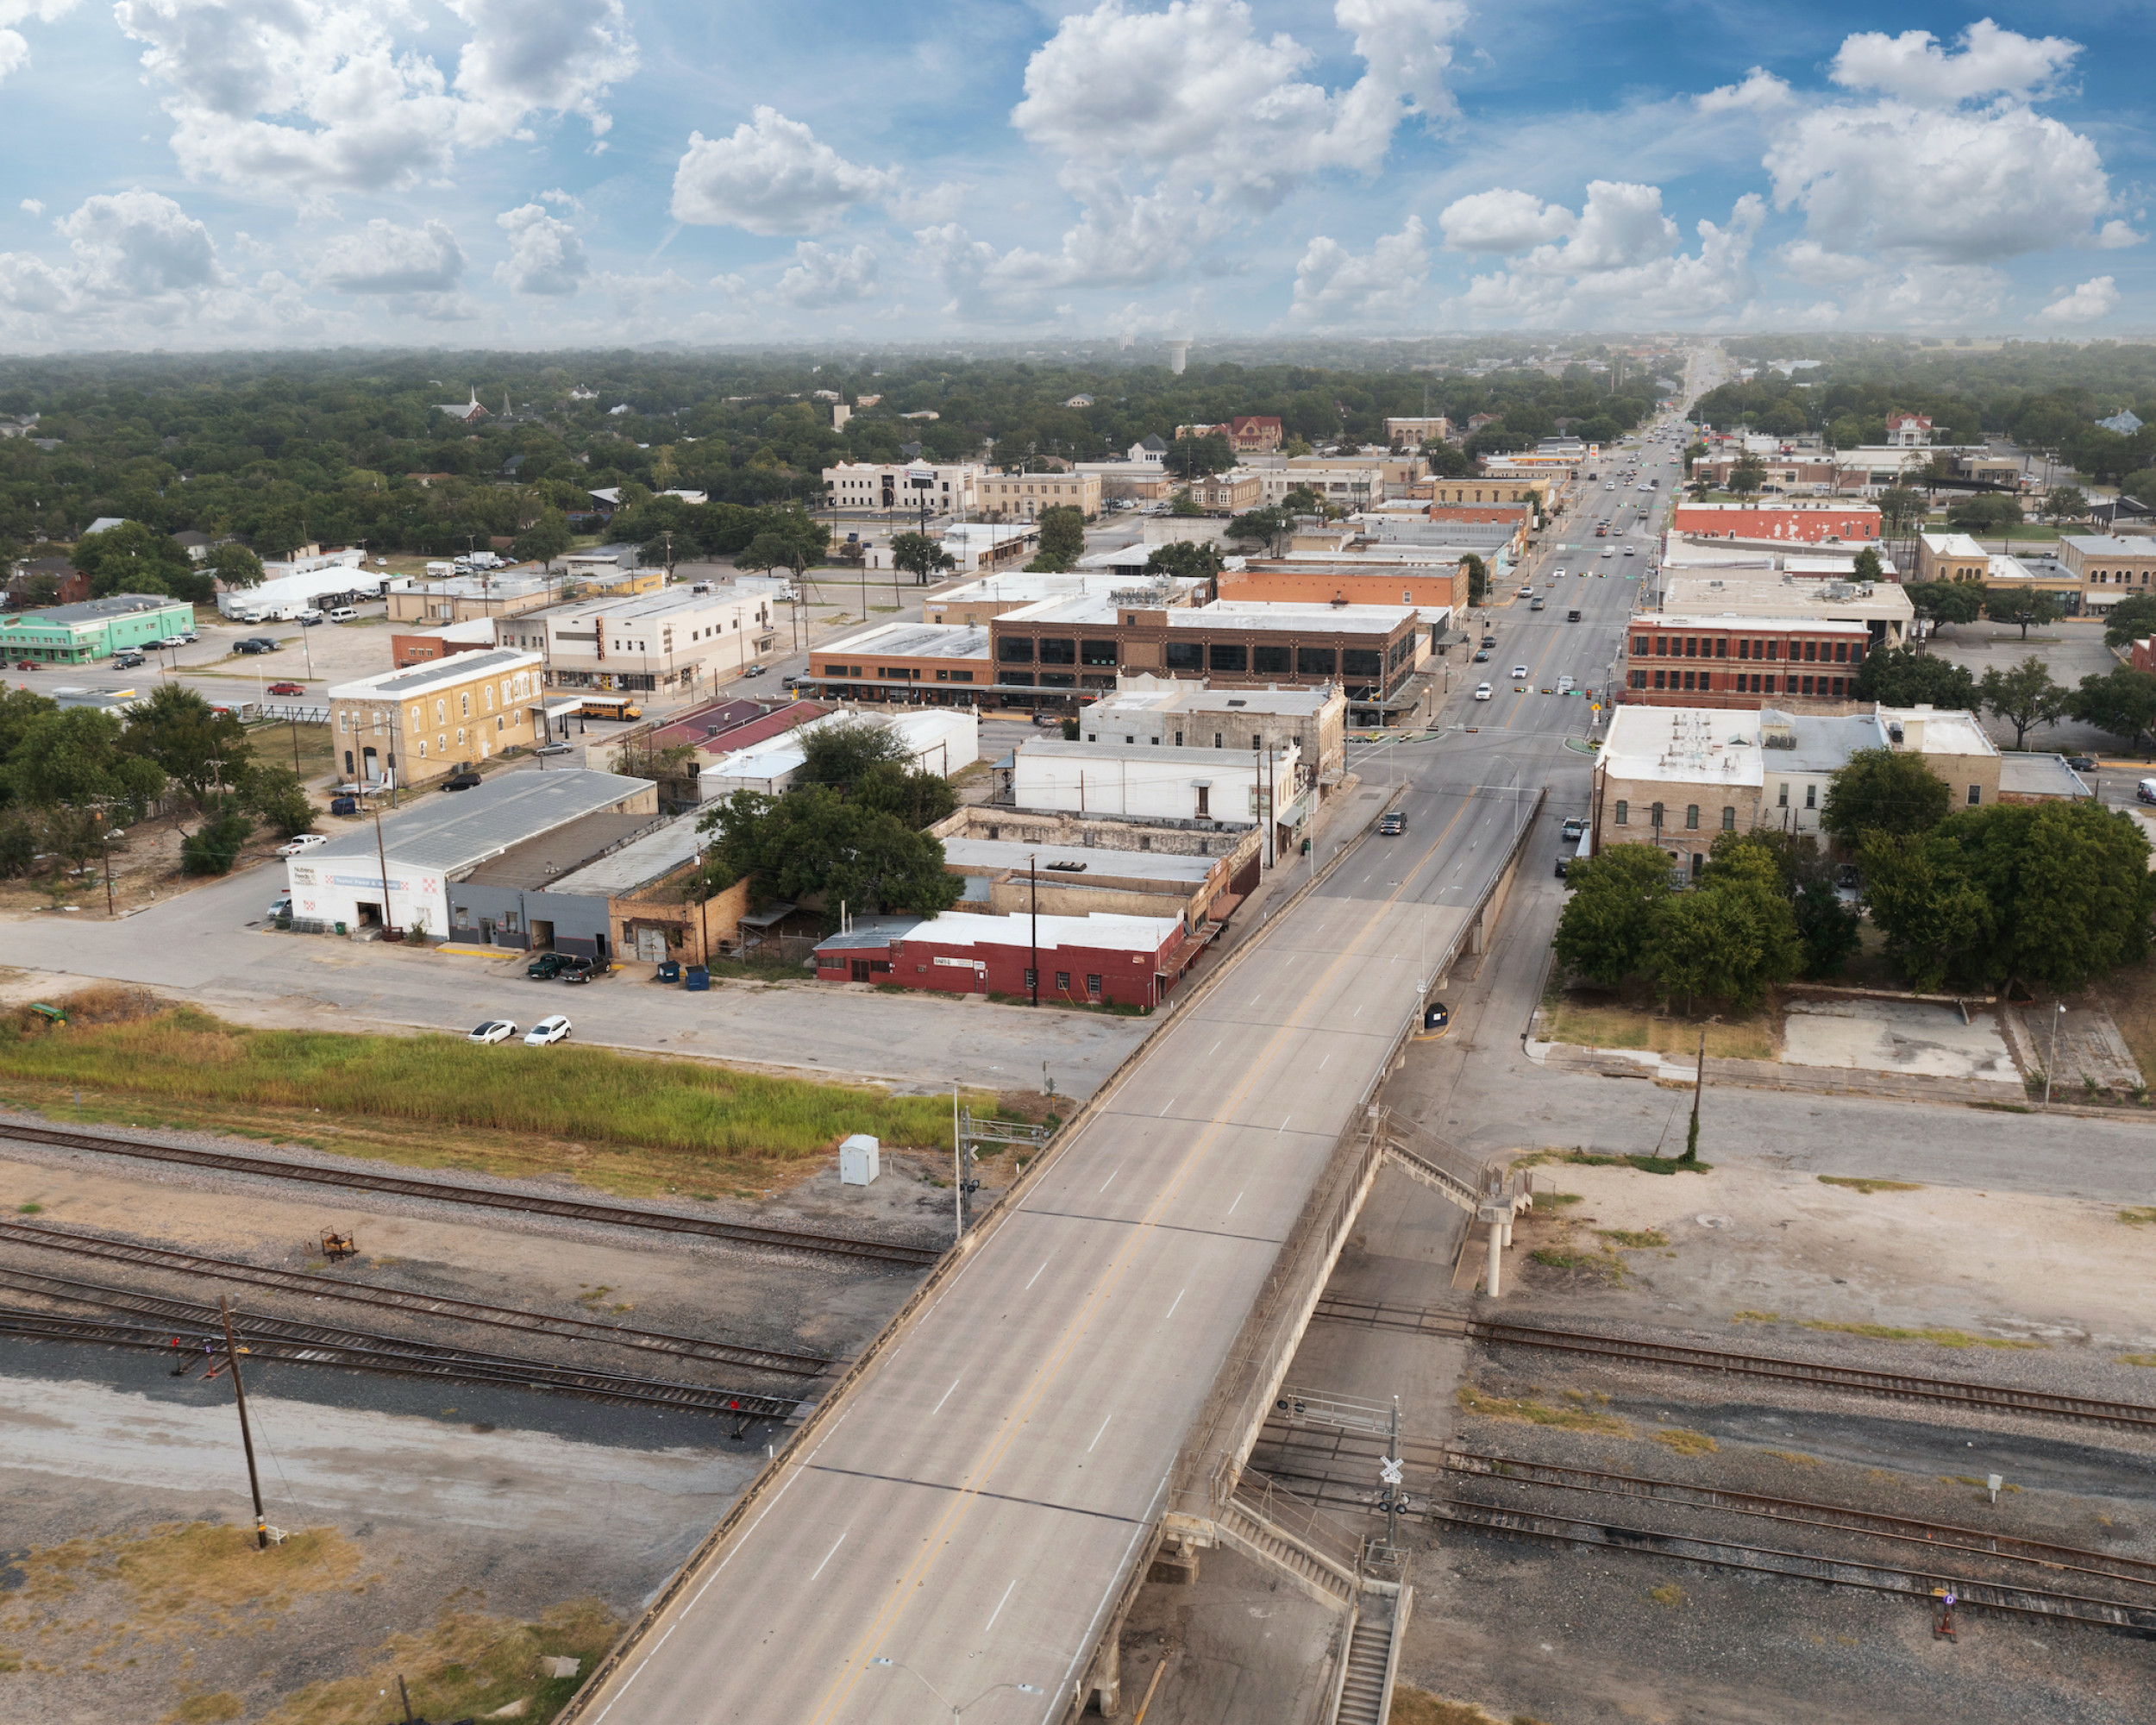 Aerial view of the road going through downtown Taylor